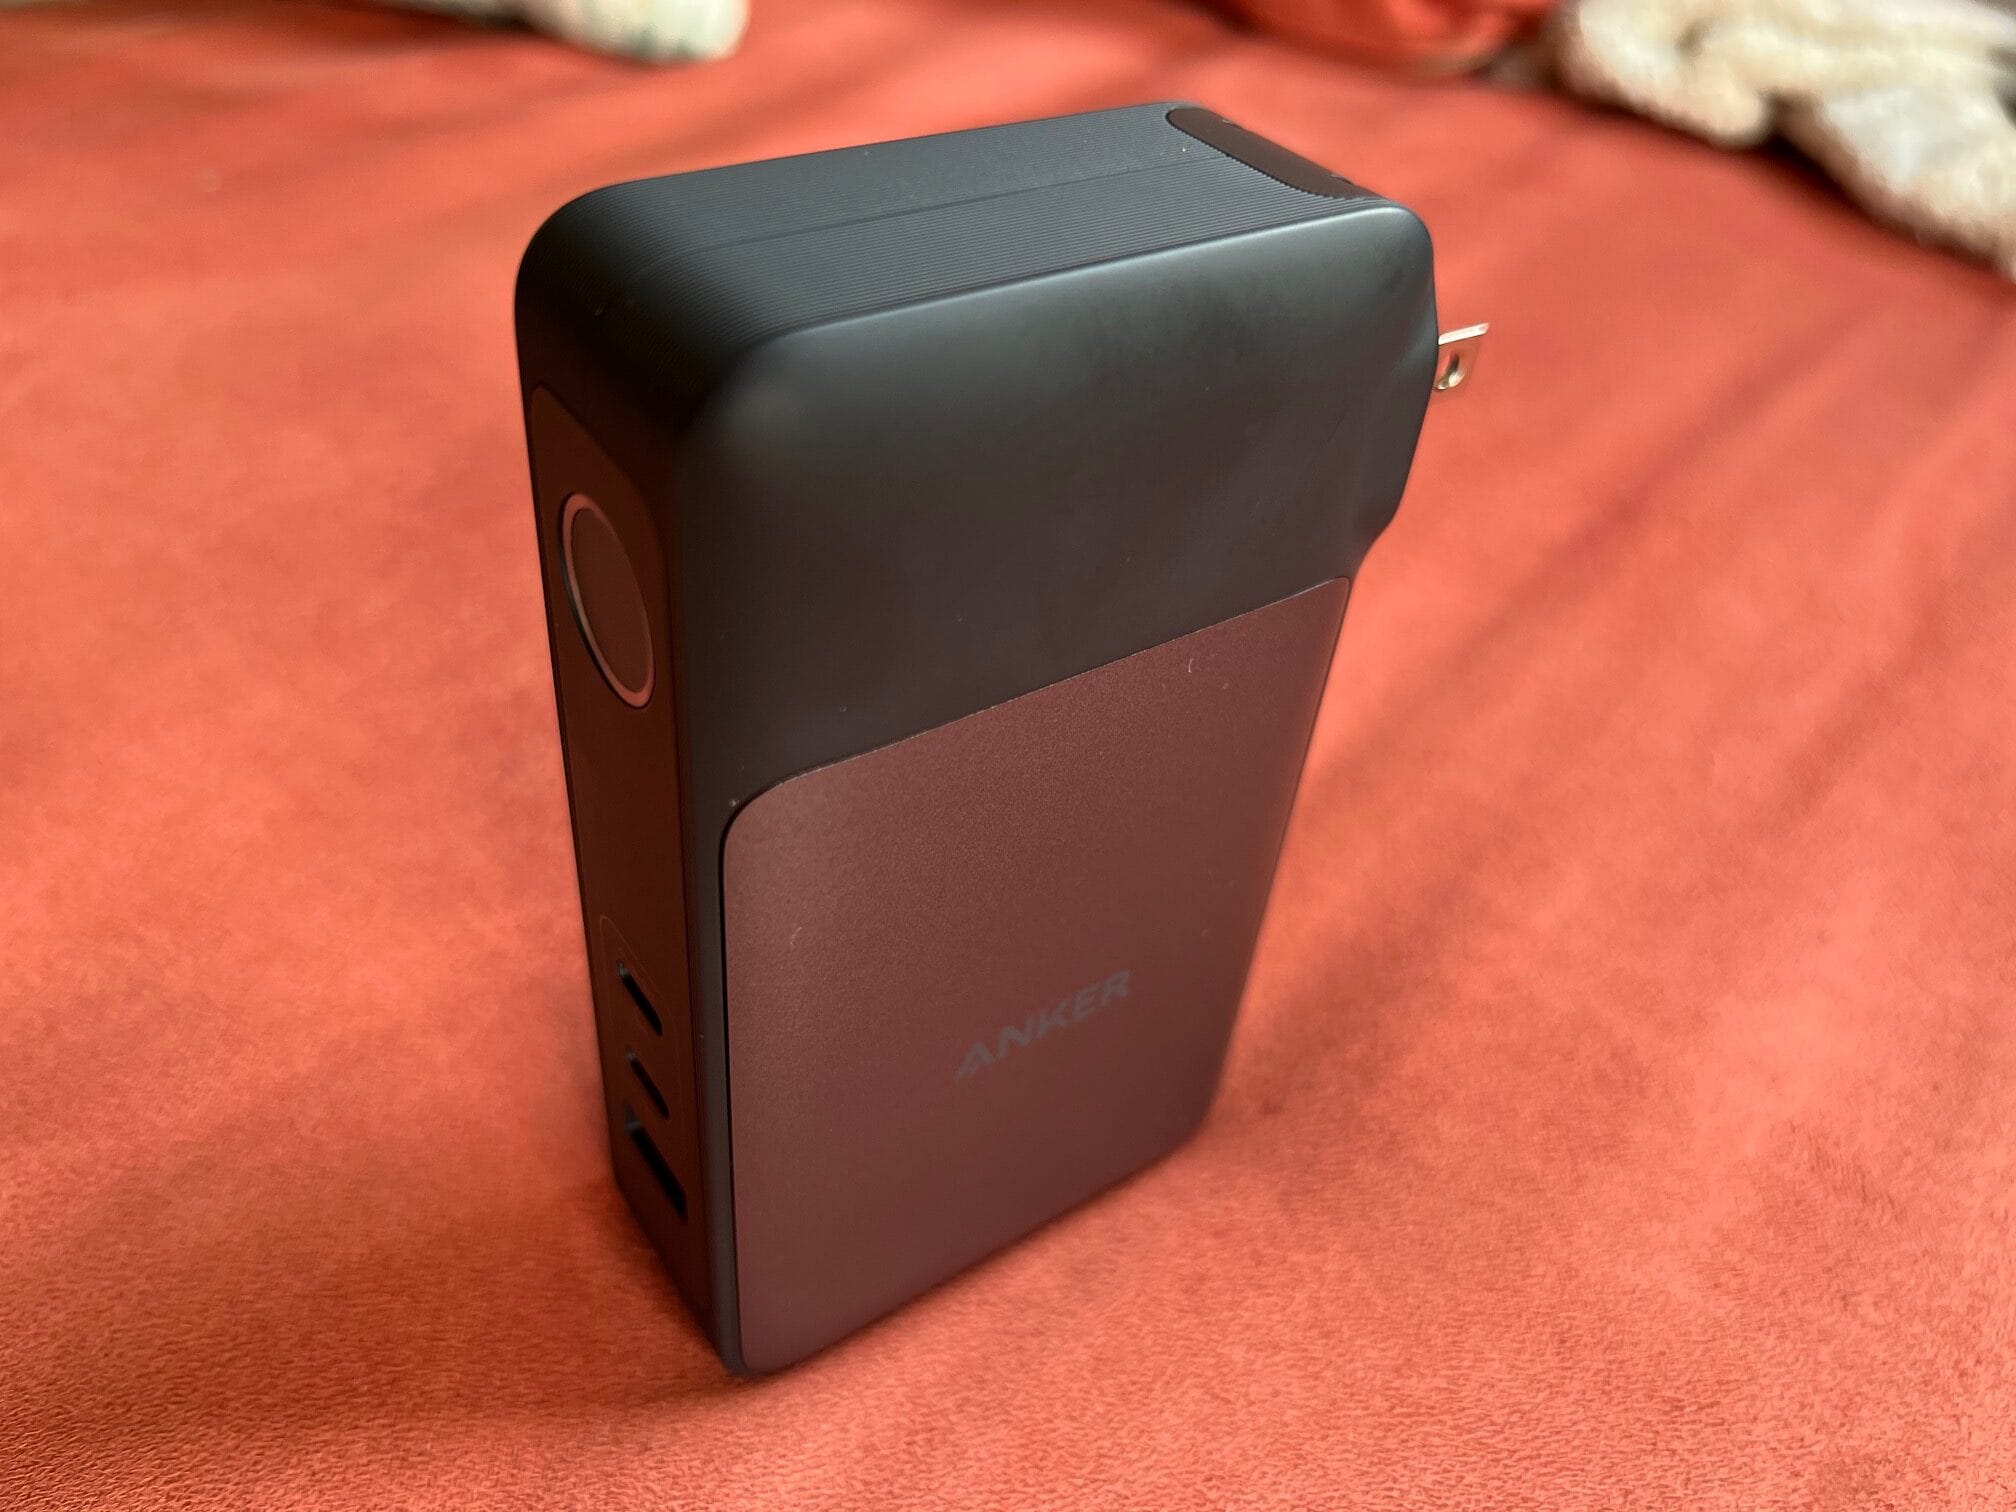 The power bank can be a wall charger or a portable battery. 